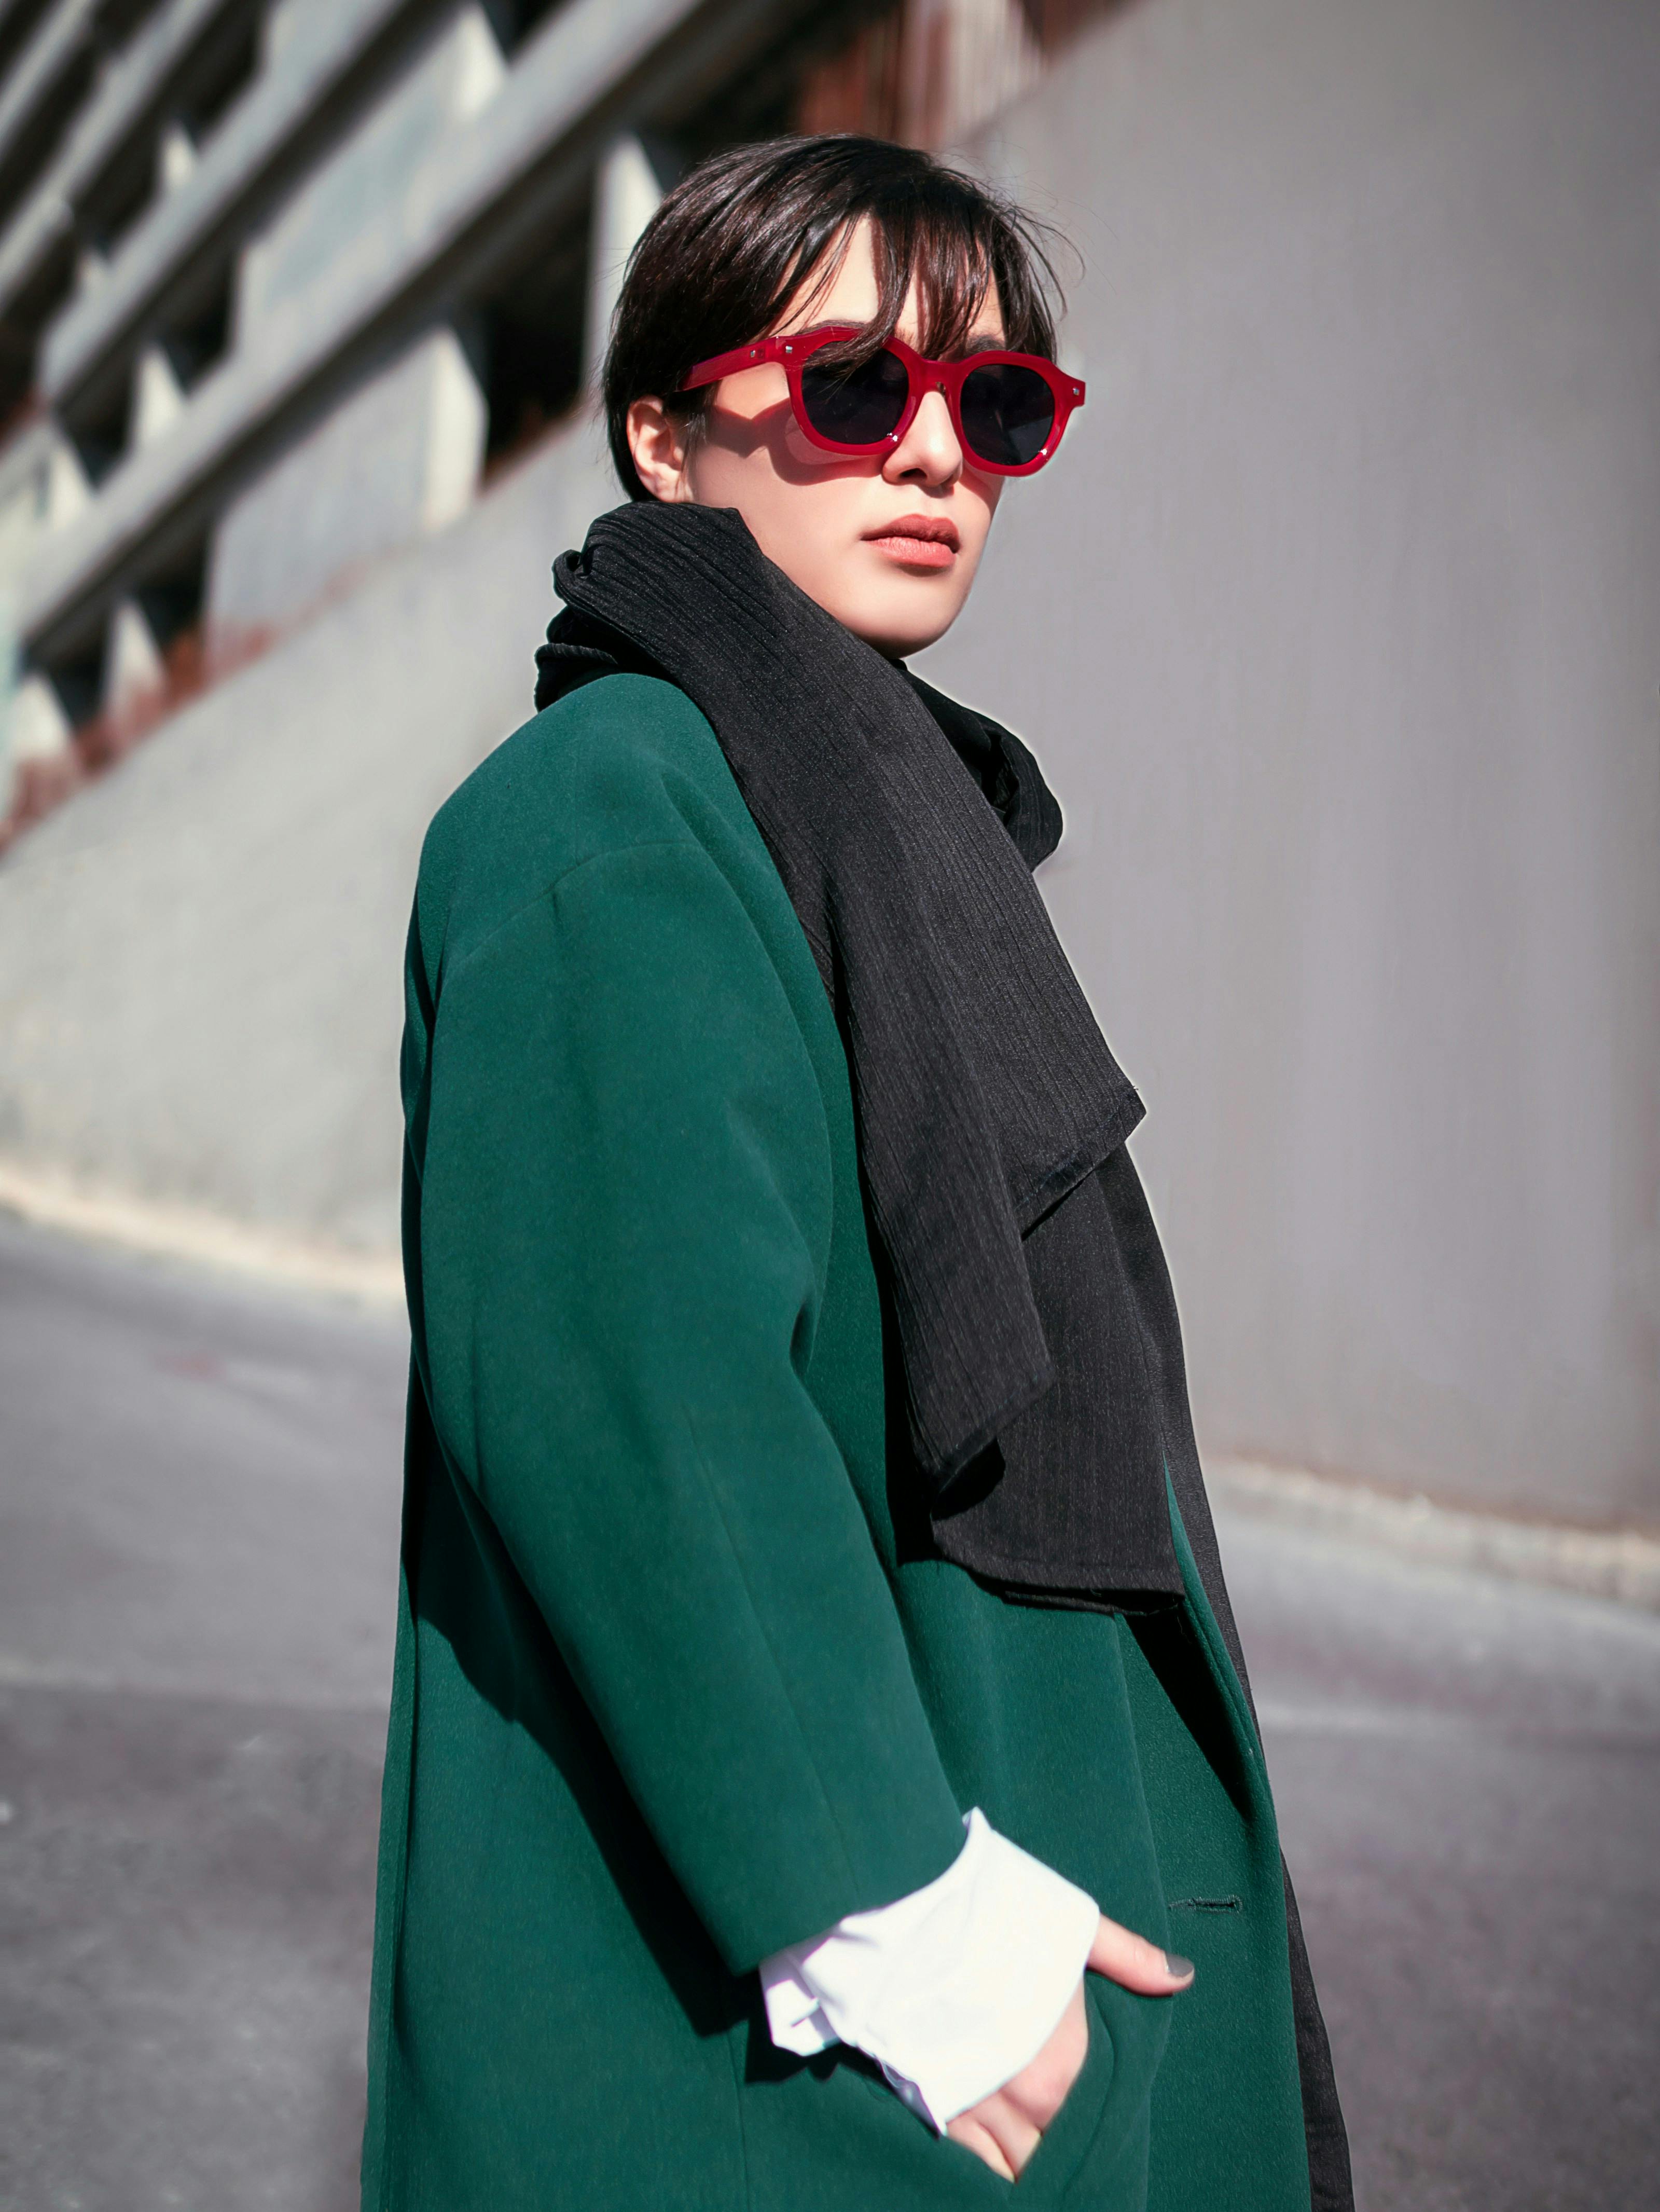 a person wearing sunglasses and a green coat